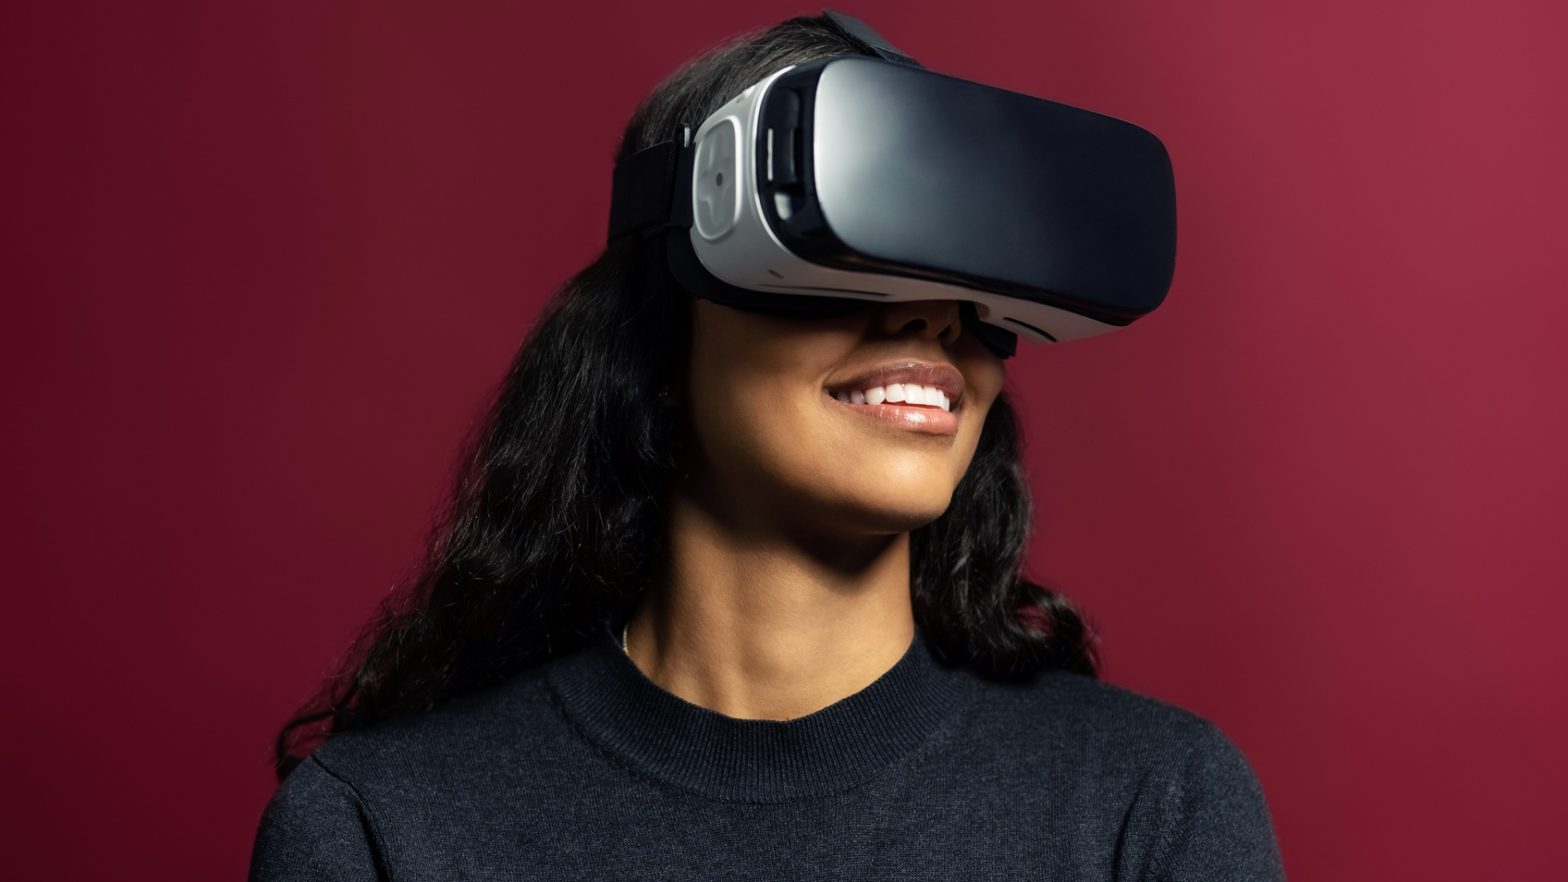 Here Are 5 Crazy Things You Can Buy In The Metaverse — So Far